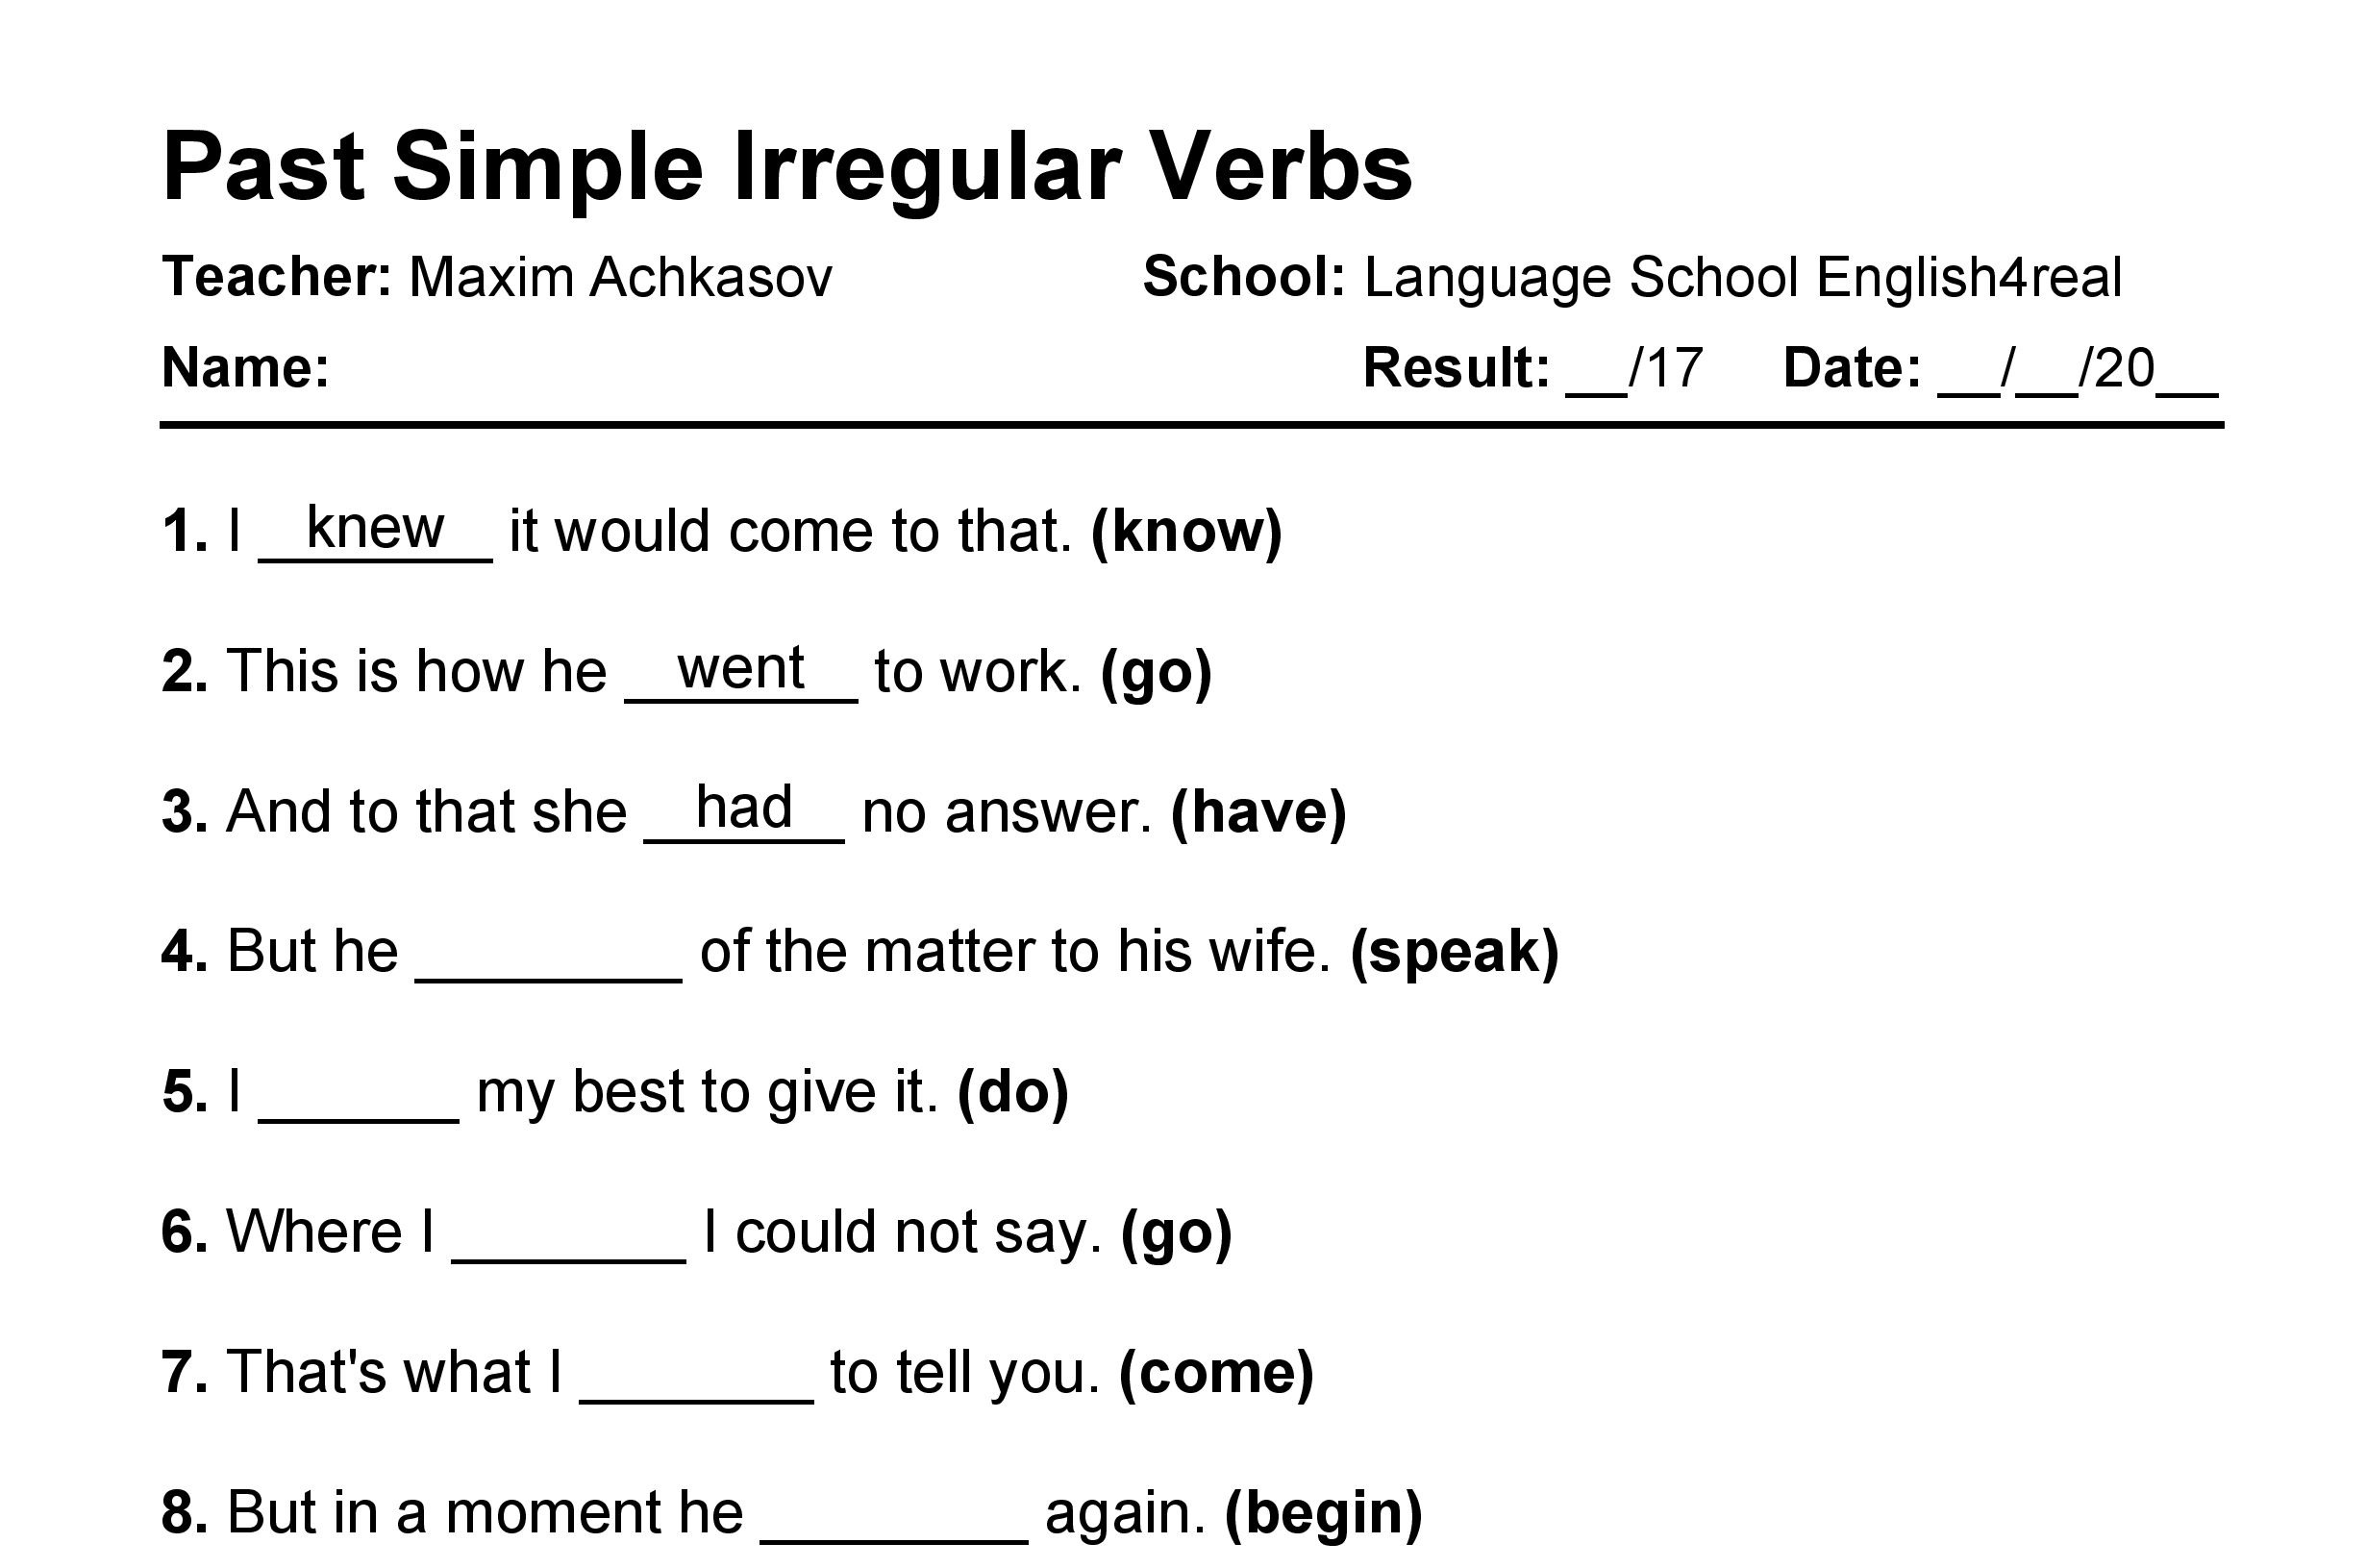 English grammar fill in the blanks exercises with answers in PDF - Past Simple Irregular